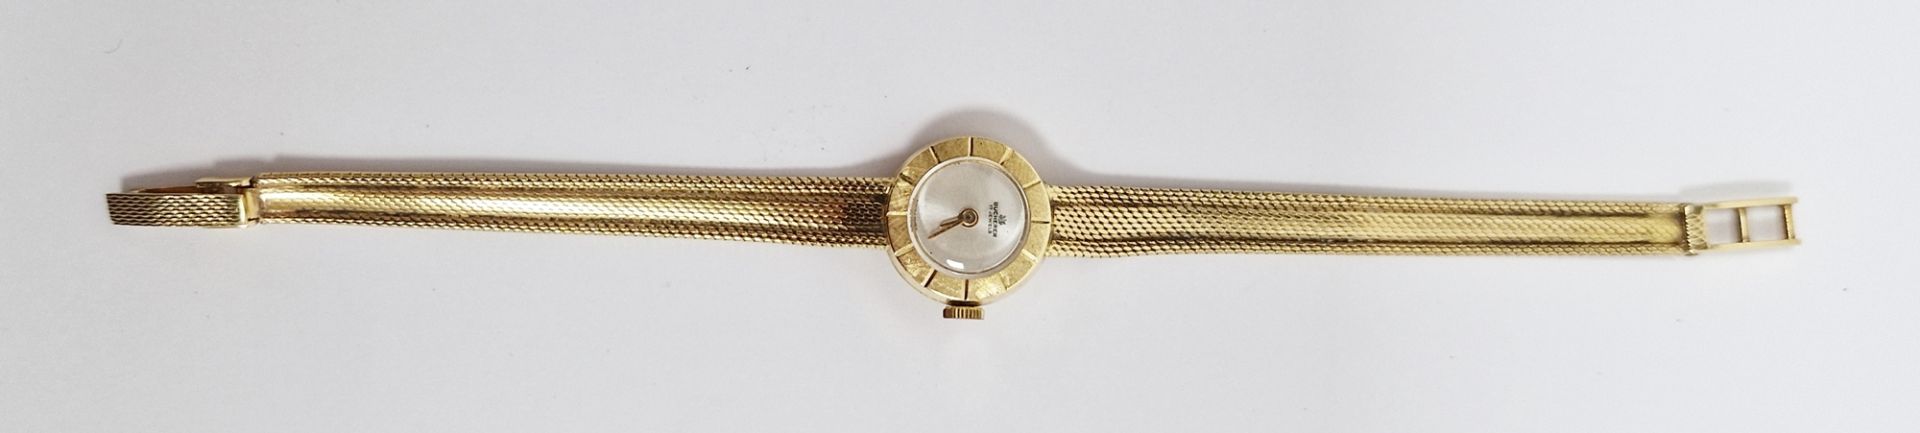 Bucherer lady’s 18ct gold wristwatch, the circular dial with engine-turned border, on woven mesh - Image 2 of 2